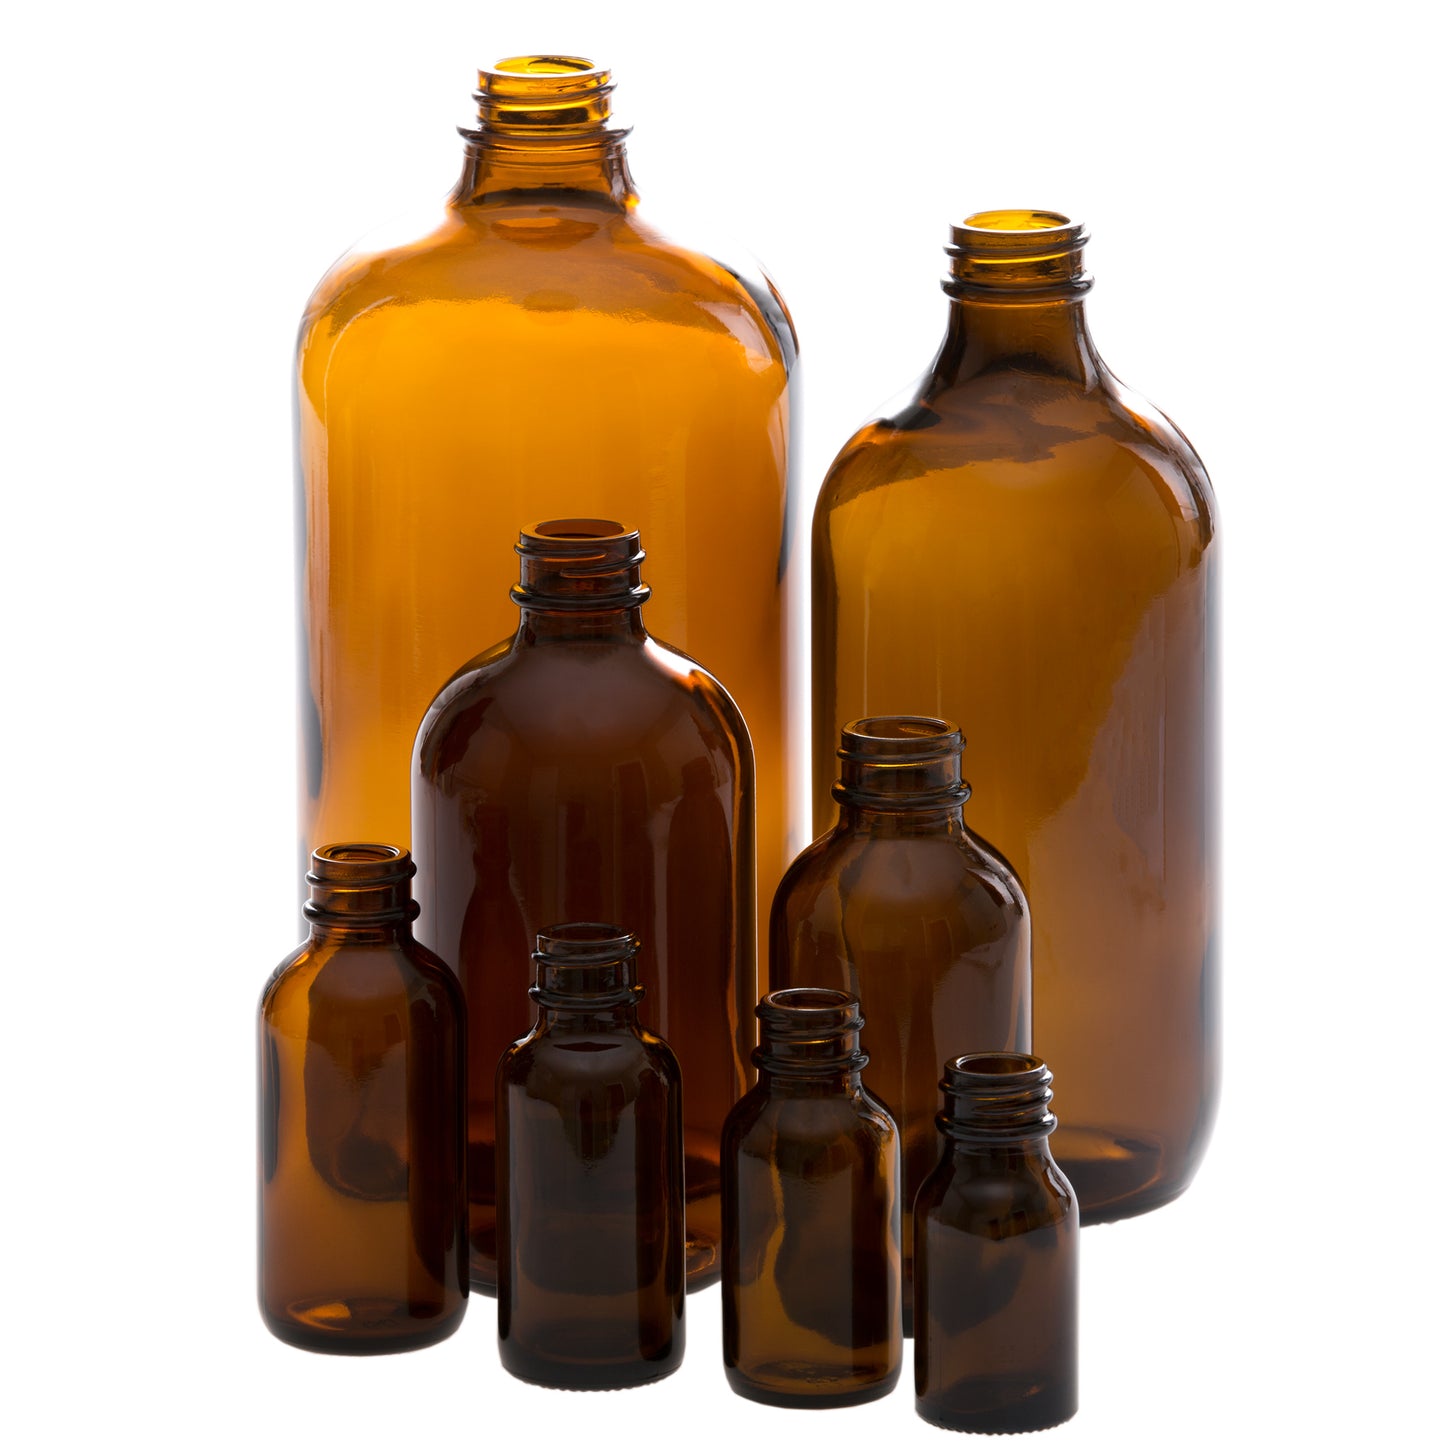 25 ml Amber Glass Bottle with 20-400 Neck